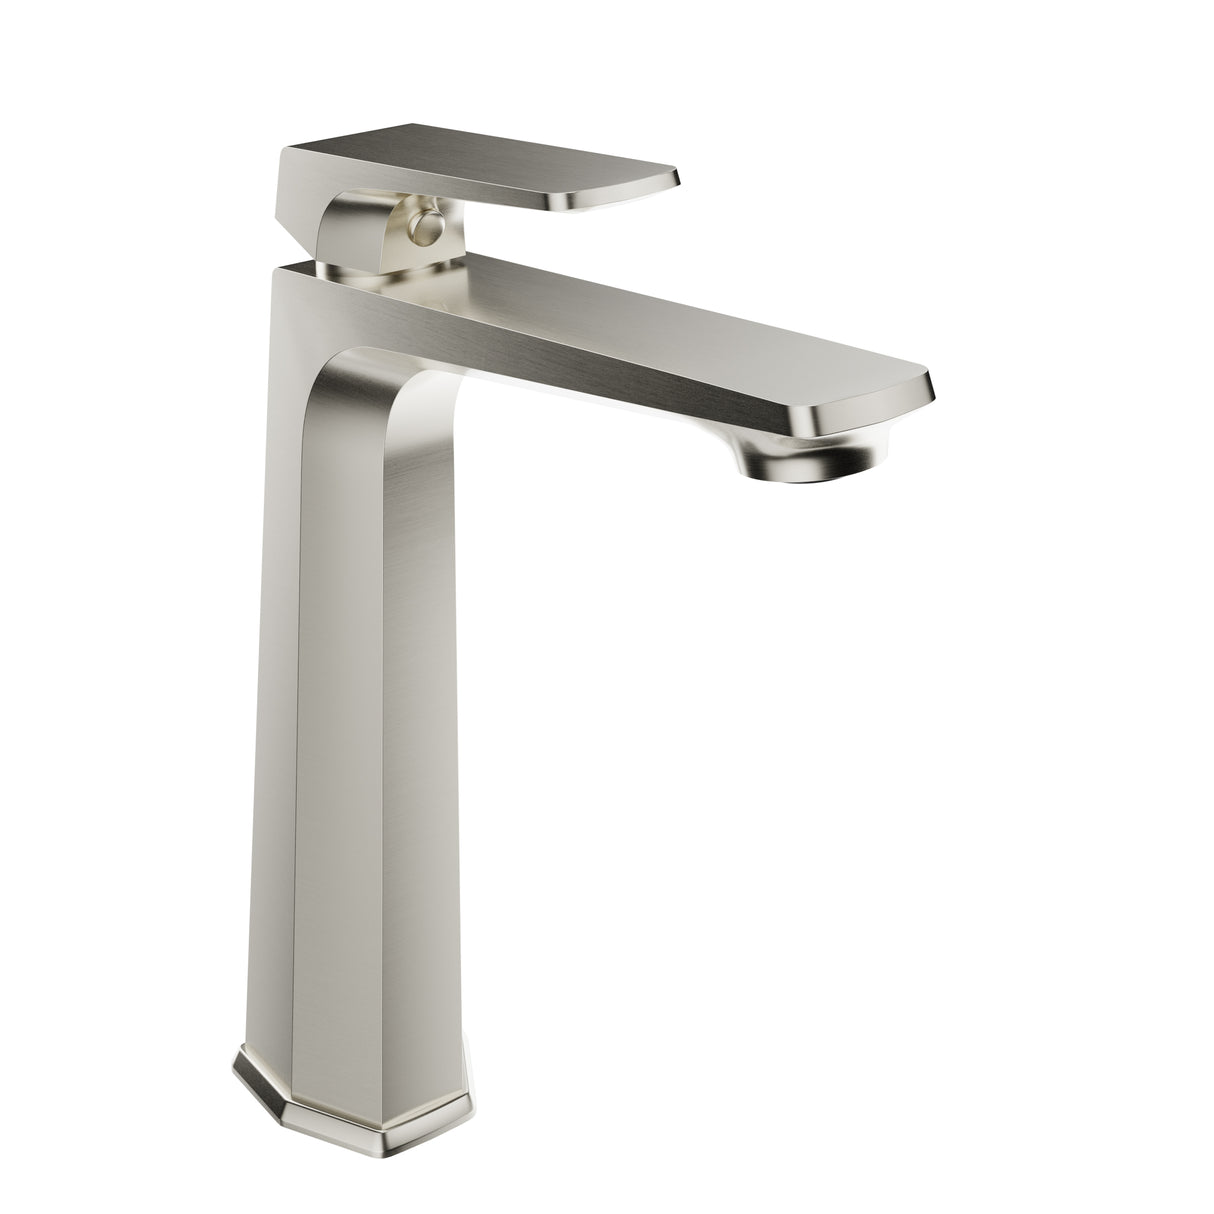 ANZZI L-AZ904BN Single Handle Single Hole Bathroom Vessel Sink Faucet With Pop-up Drain in Brushed Nickel